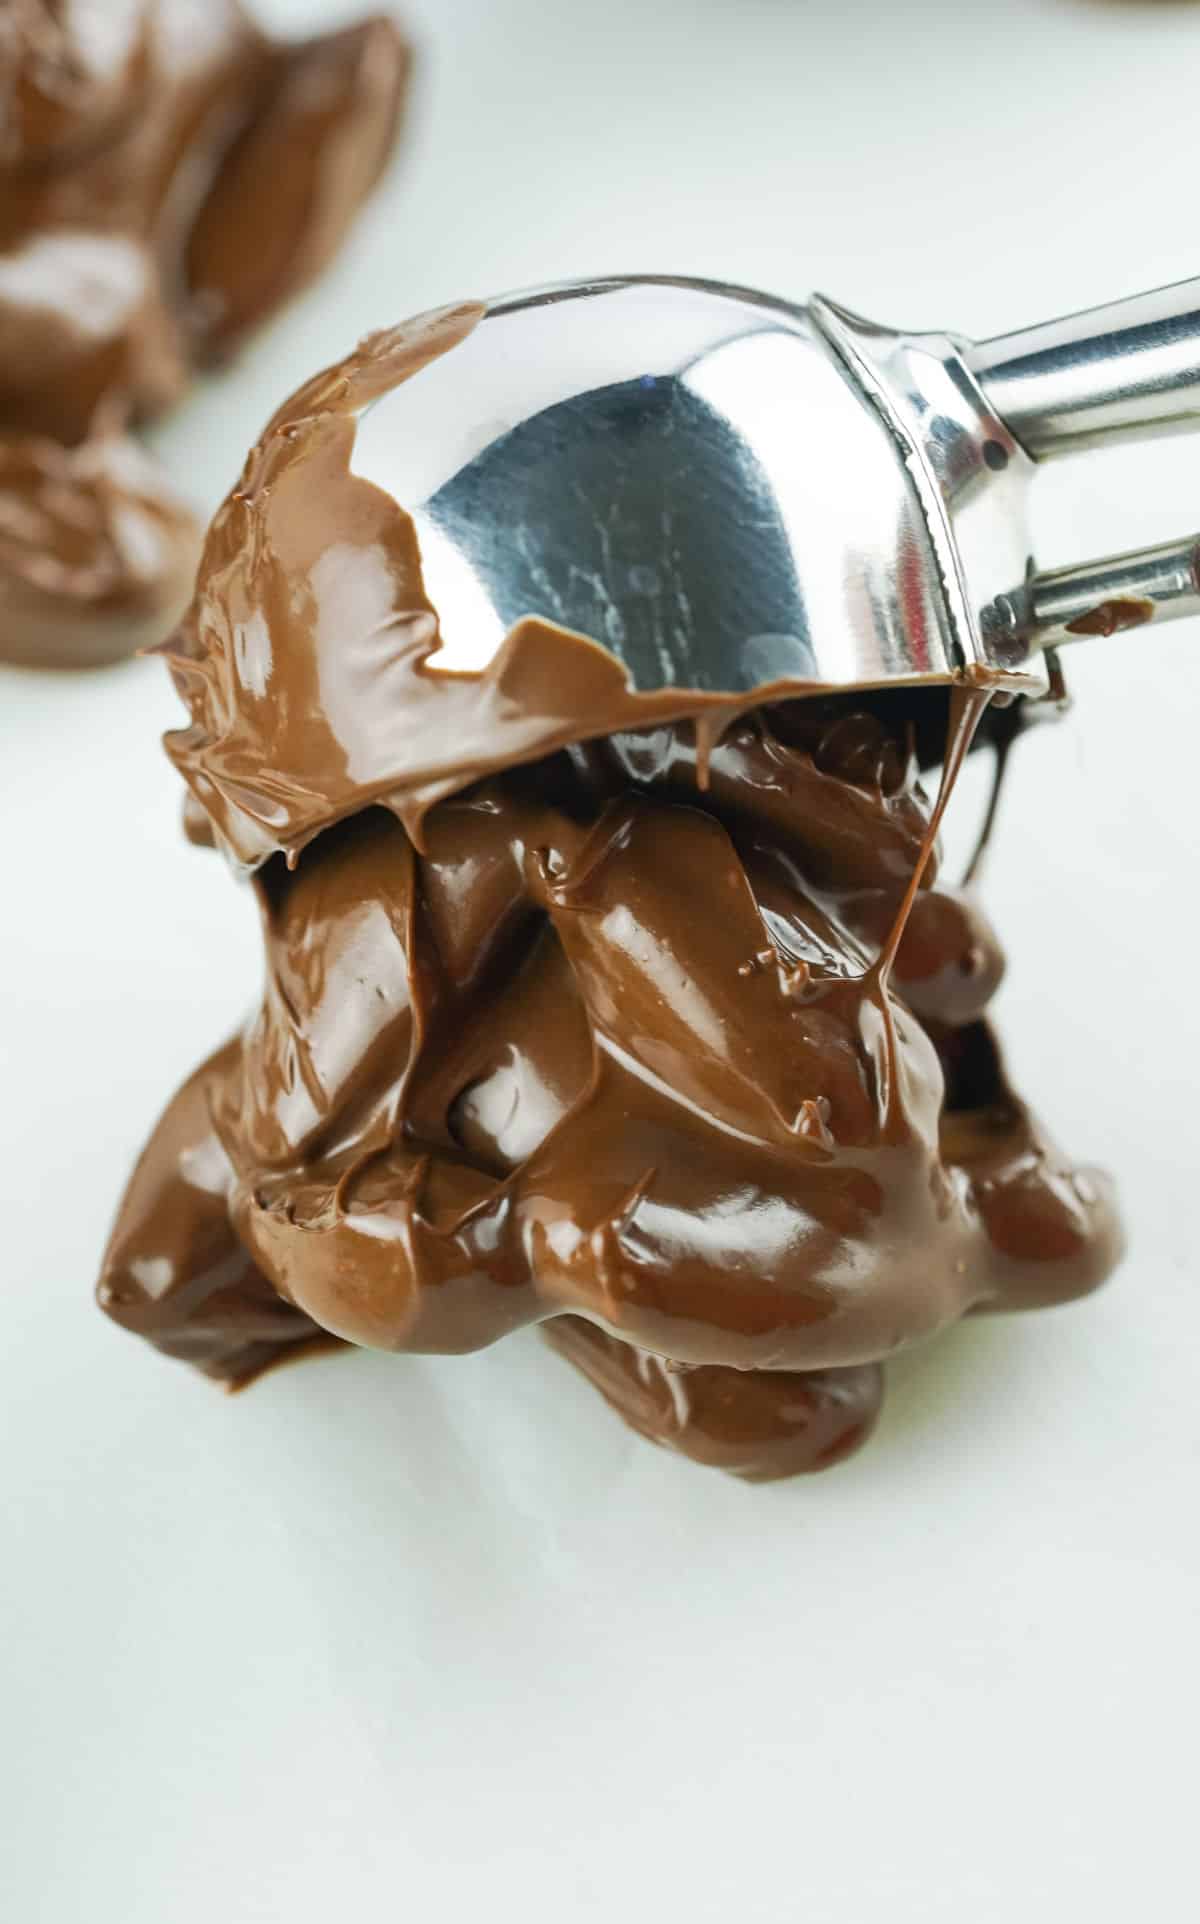 Scooping the chocolate almond mixture with a cookie scoop and placing it on parchment paper